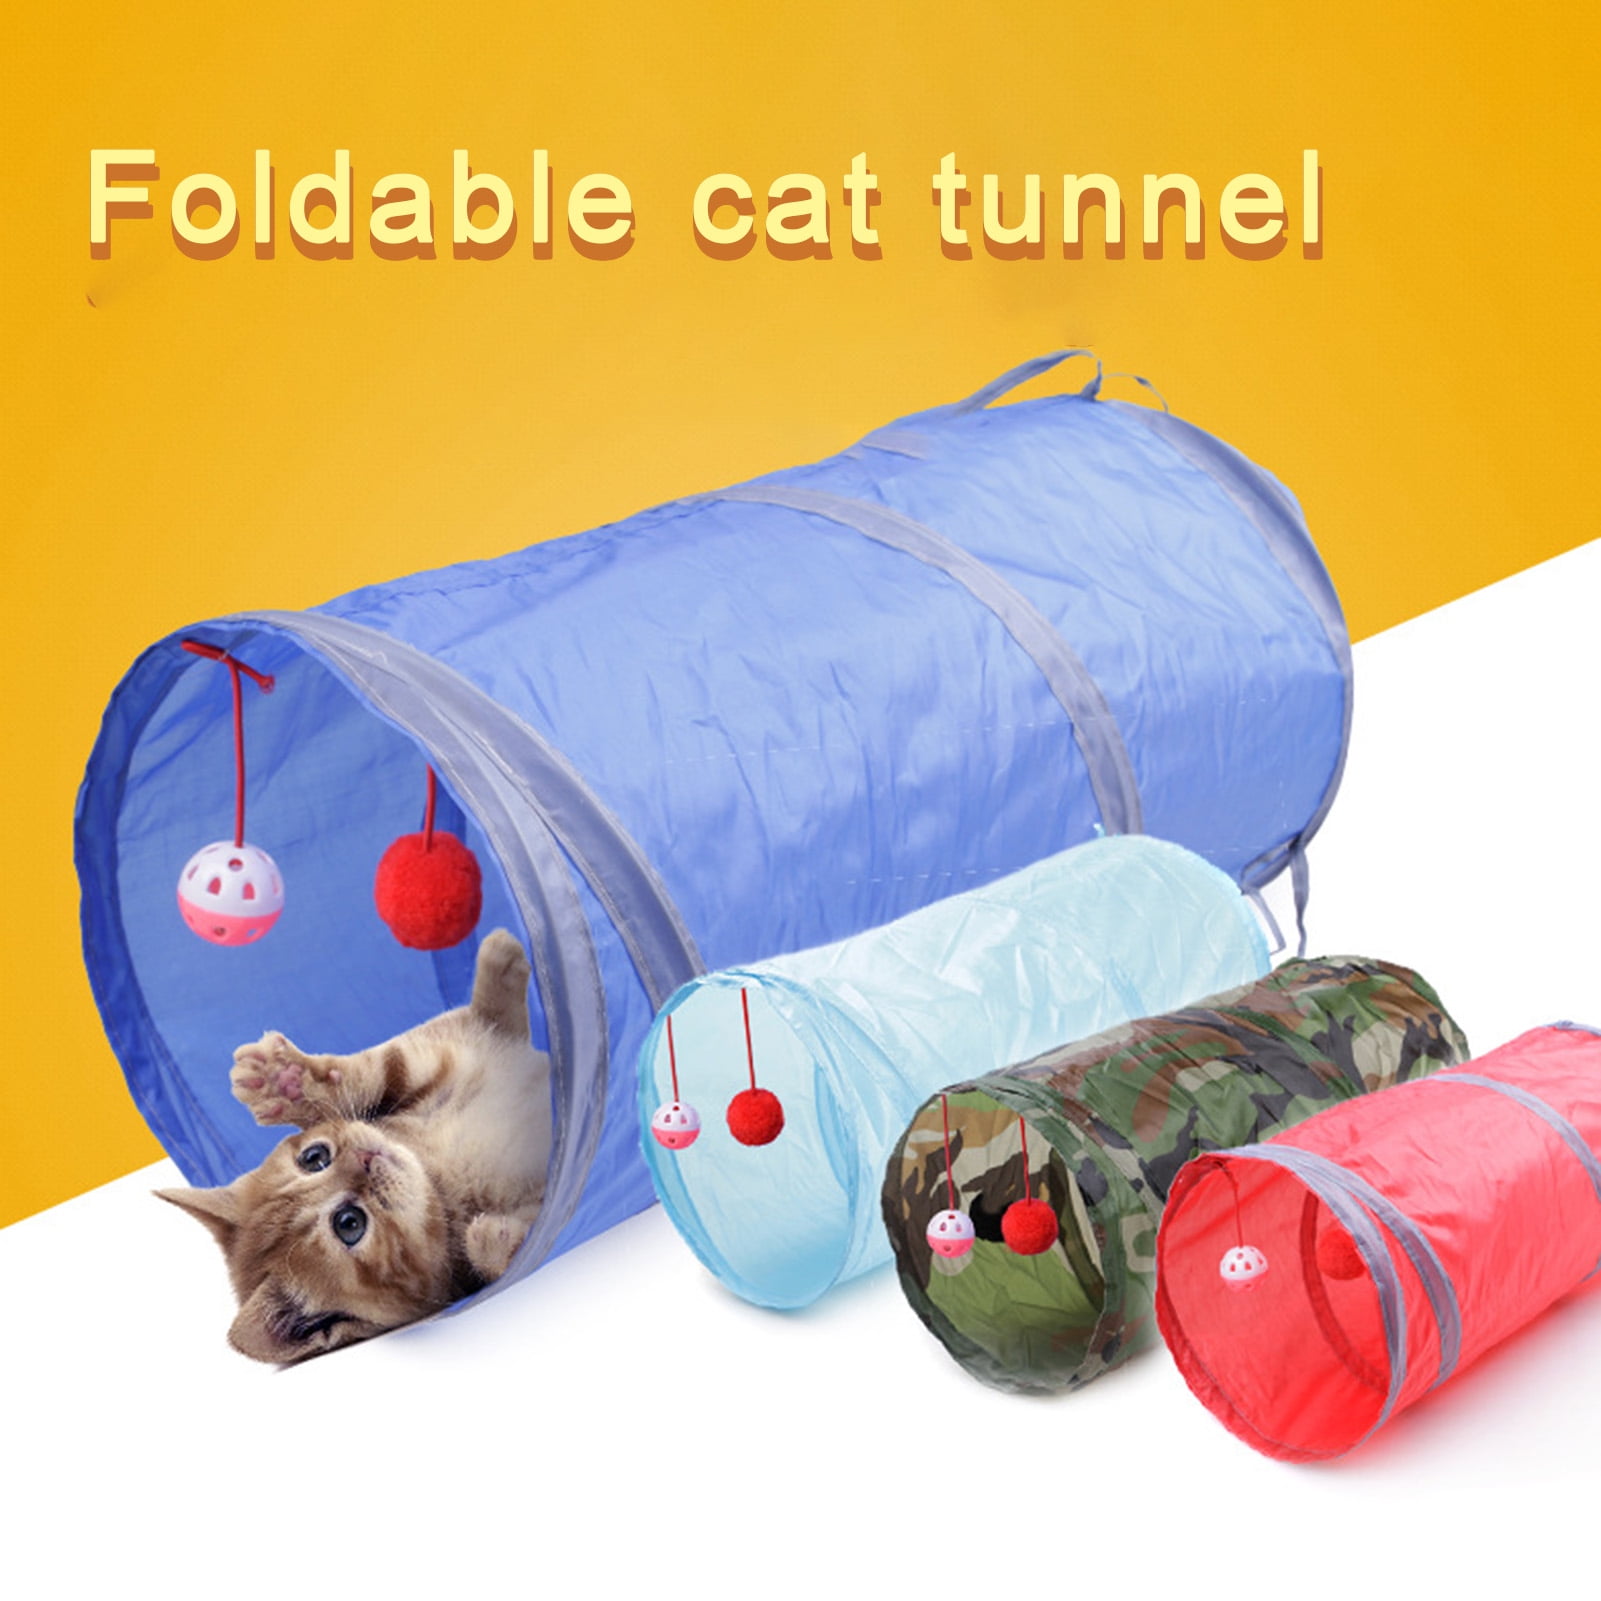 Ingenious Fun Cat Toys Eco-Friendly Educational Pet Toys Rainbow Cat Tunnel for Cats Indoor and Outdoor Games 45.289.84in 2 Holes Collapsible Portable Dailyfun Cat Tunnel Tube